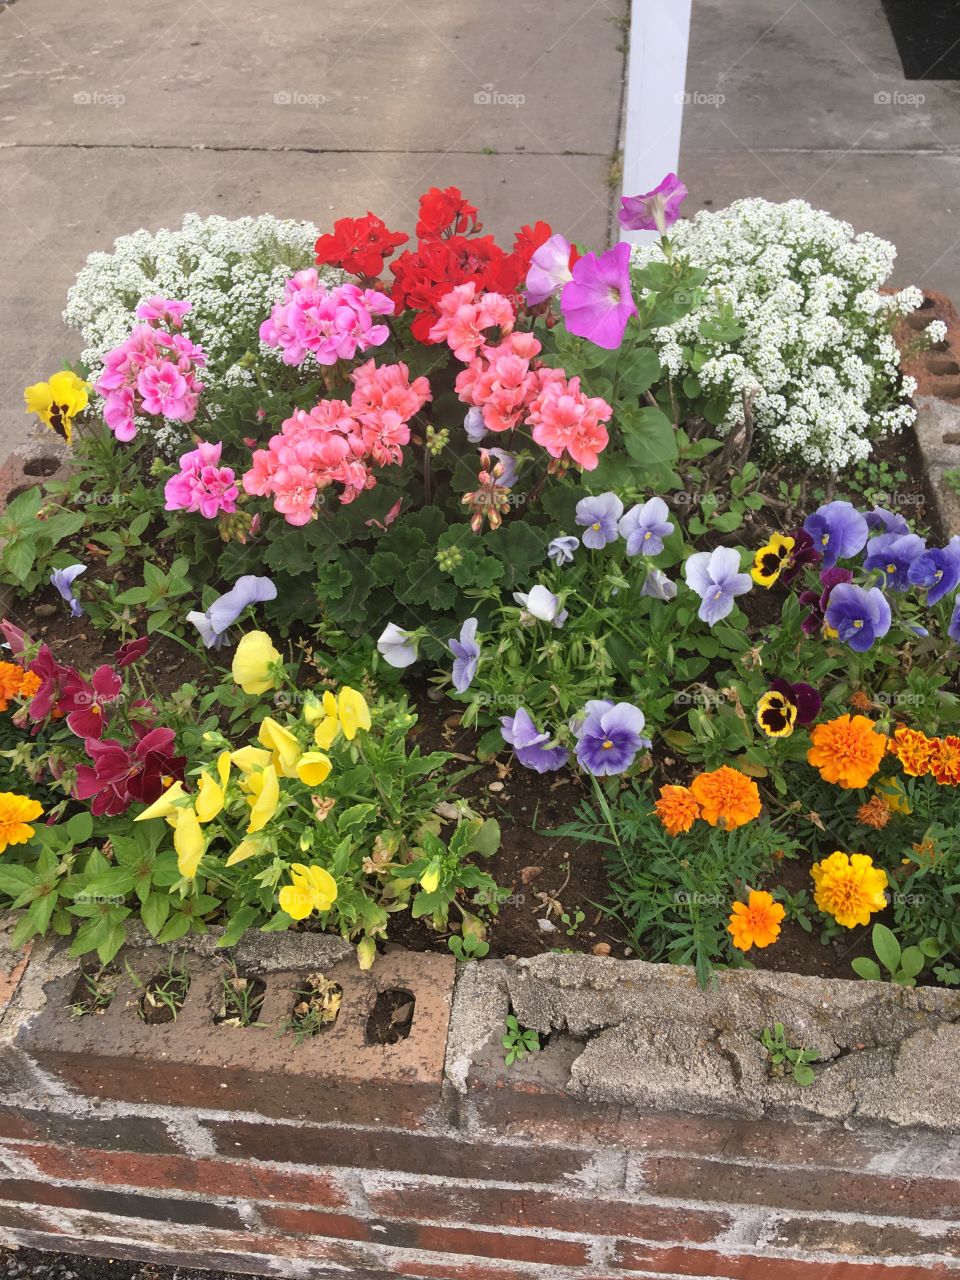 Splash of color in a brick container. Color galore yellow,pink,purple,orange and white red too.